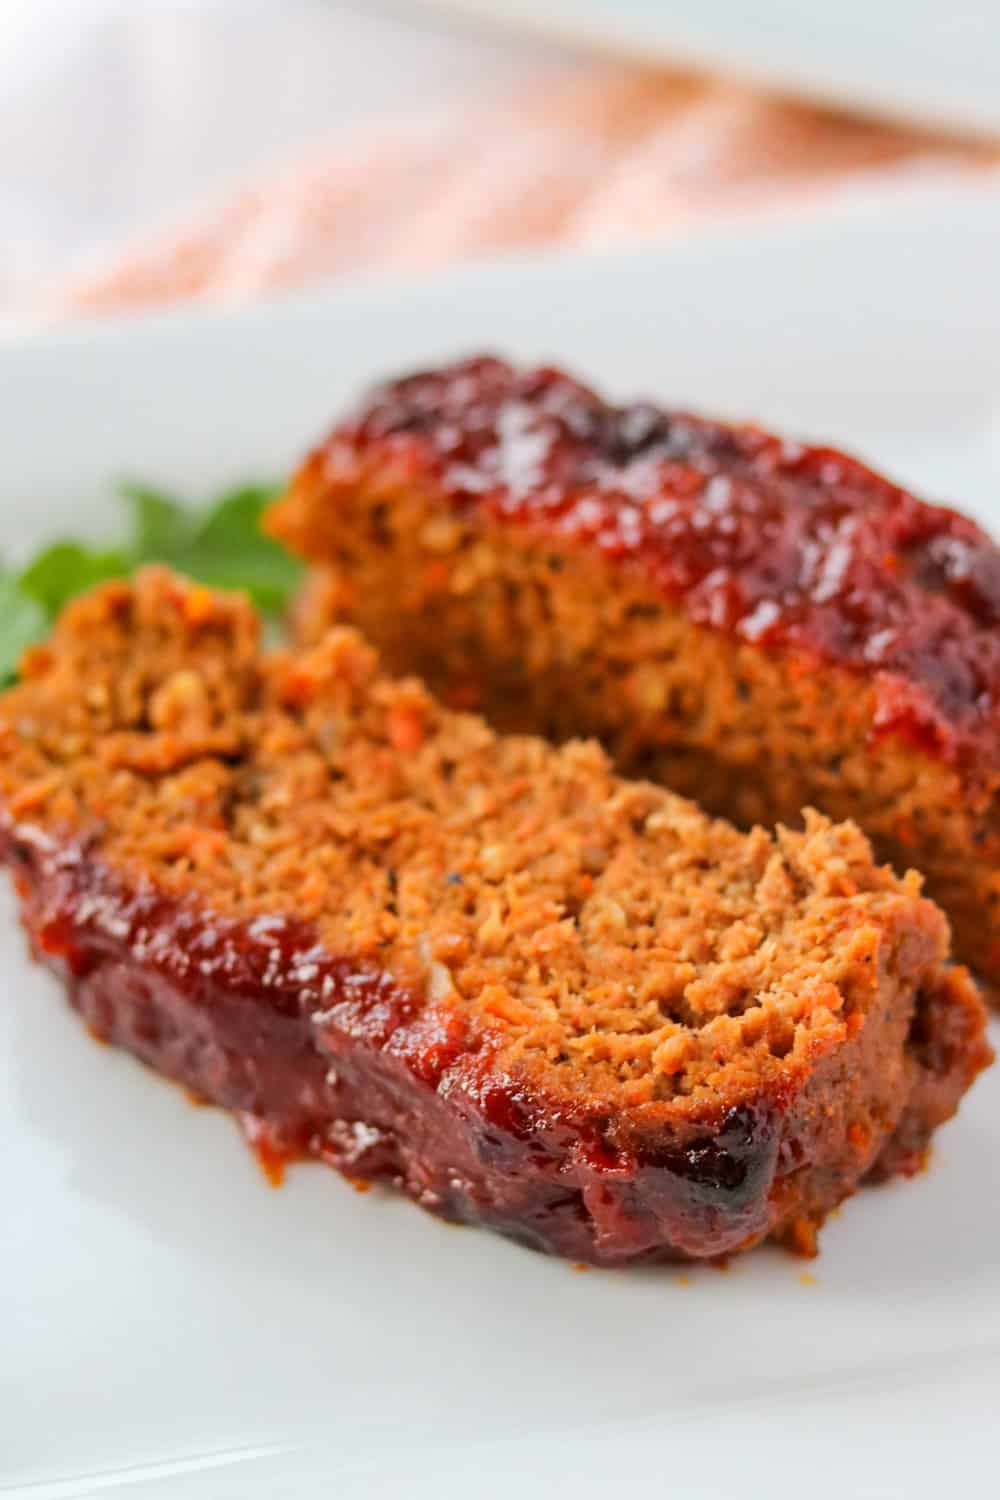 Easy Meatloaf Recipe { A Family Favorite!} | 365 Days of Baking and More